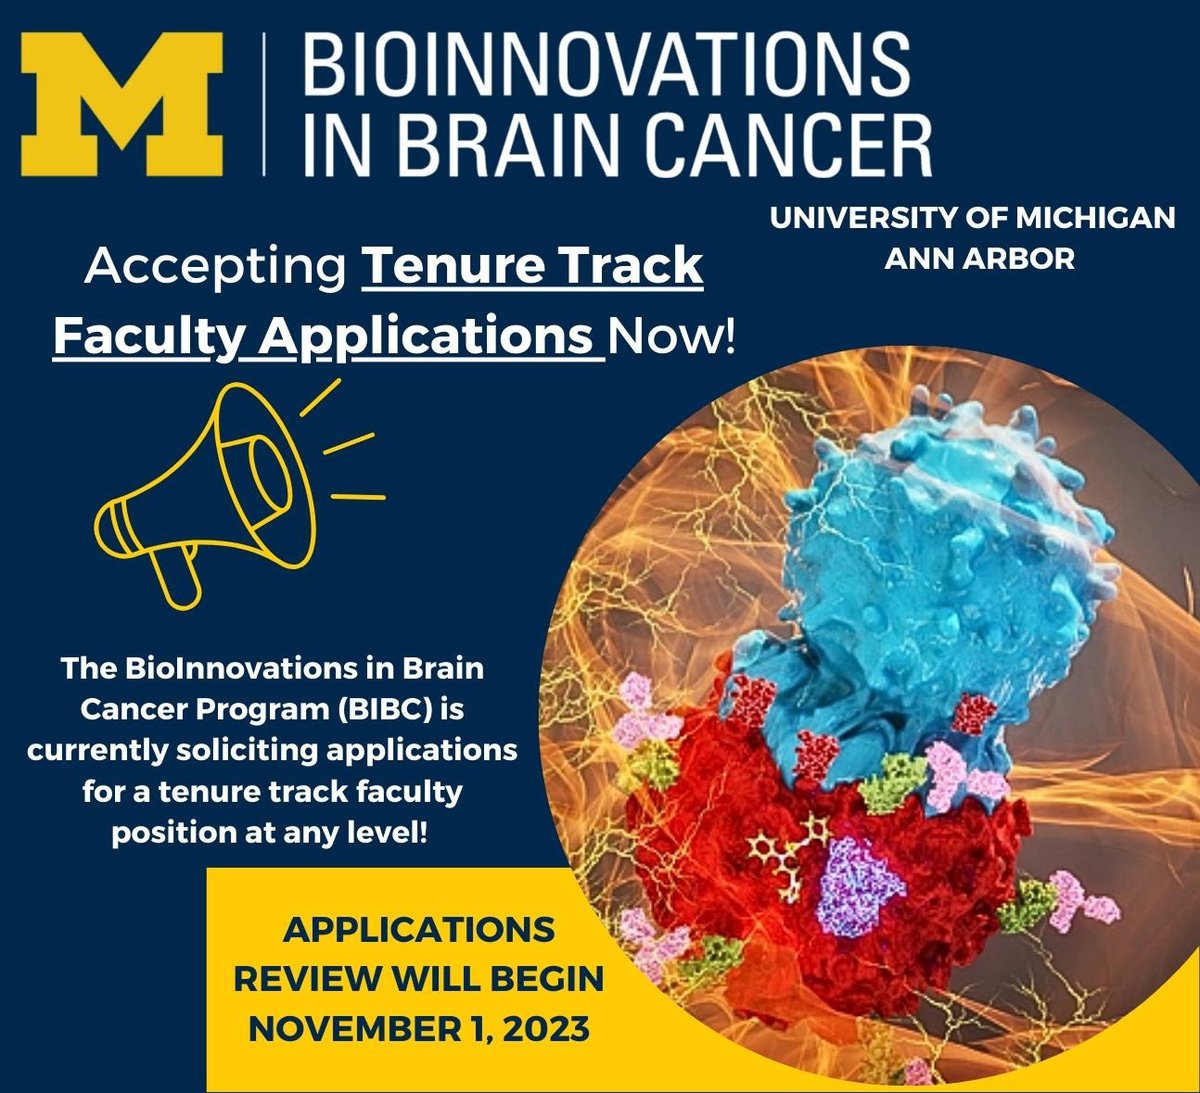 The University of Michigan has launched a Tenure Track Faculty Search for the BioInnovations in Brain Cancer Initiative (BIBC). More Information: bibraincancer.umich.edu/tenure-track-f…